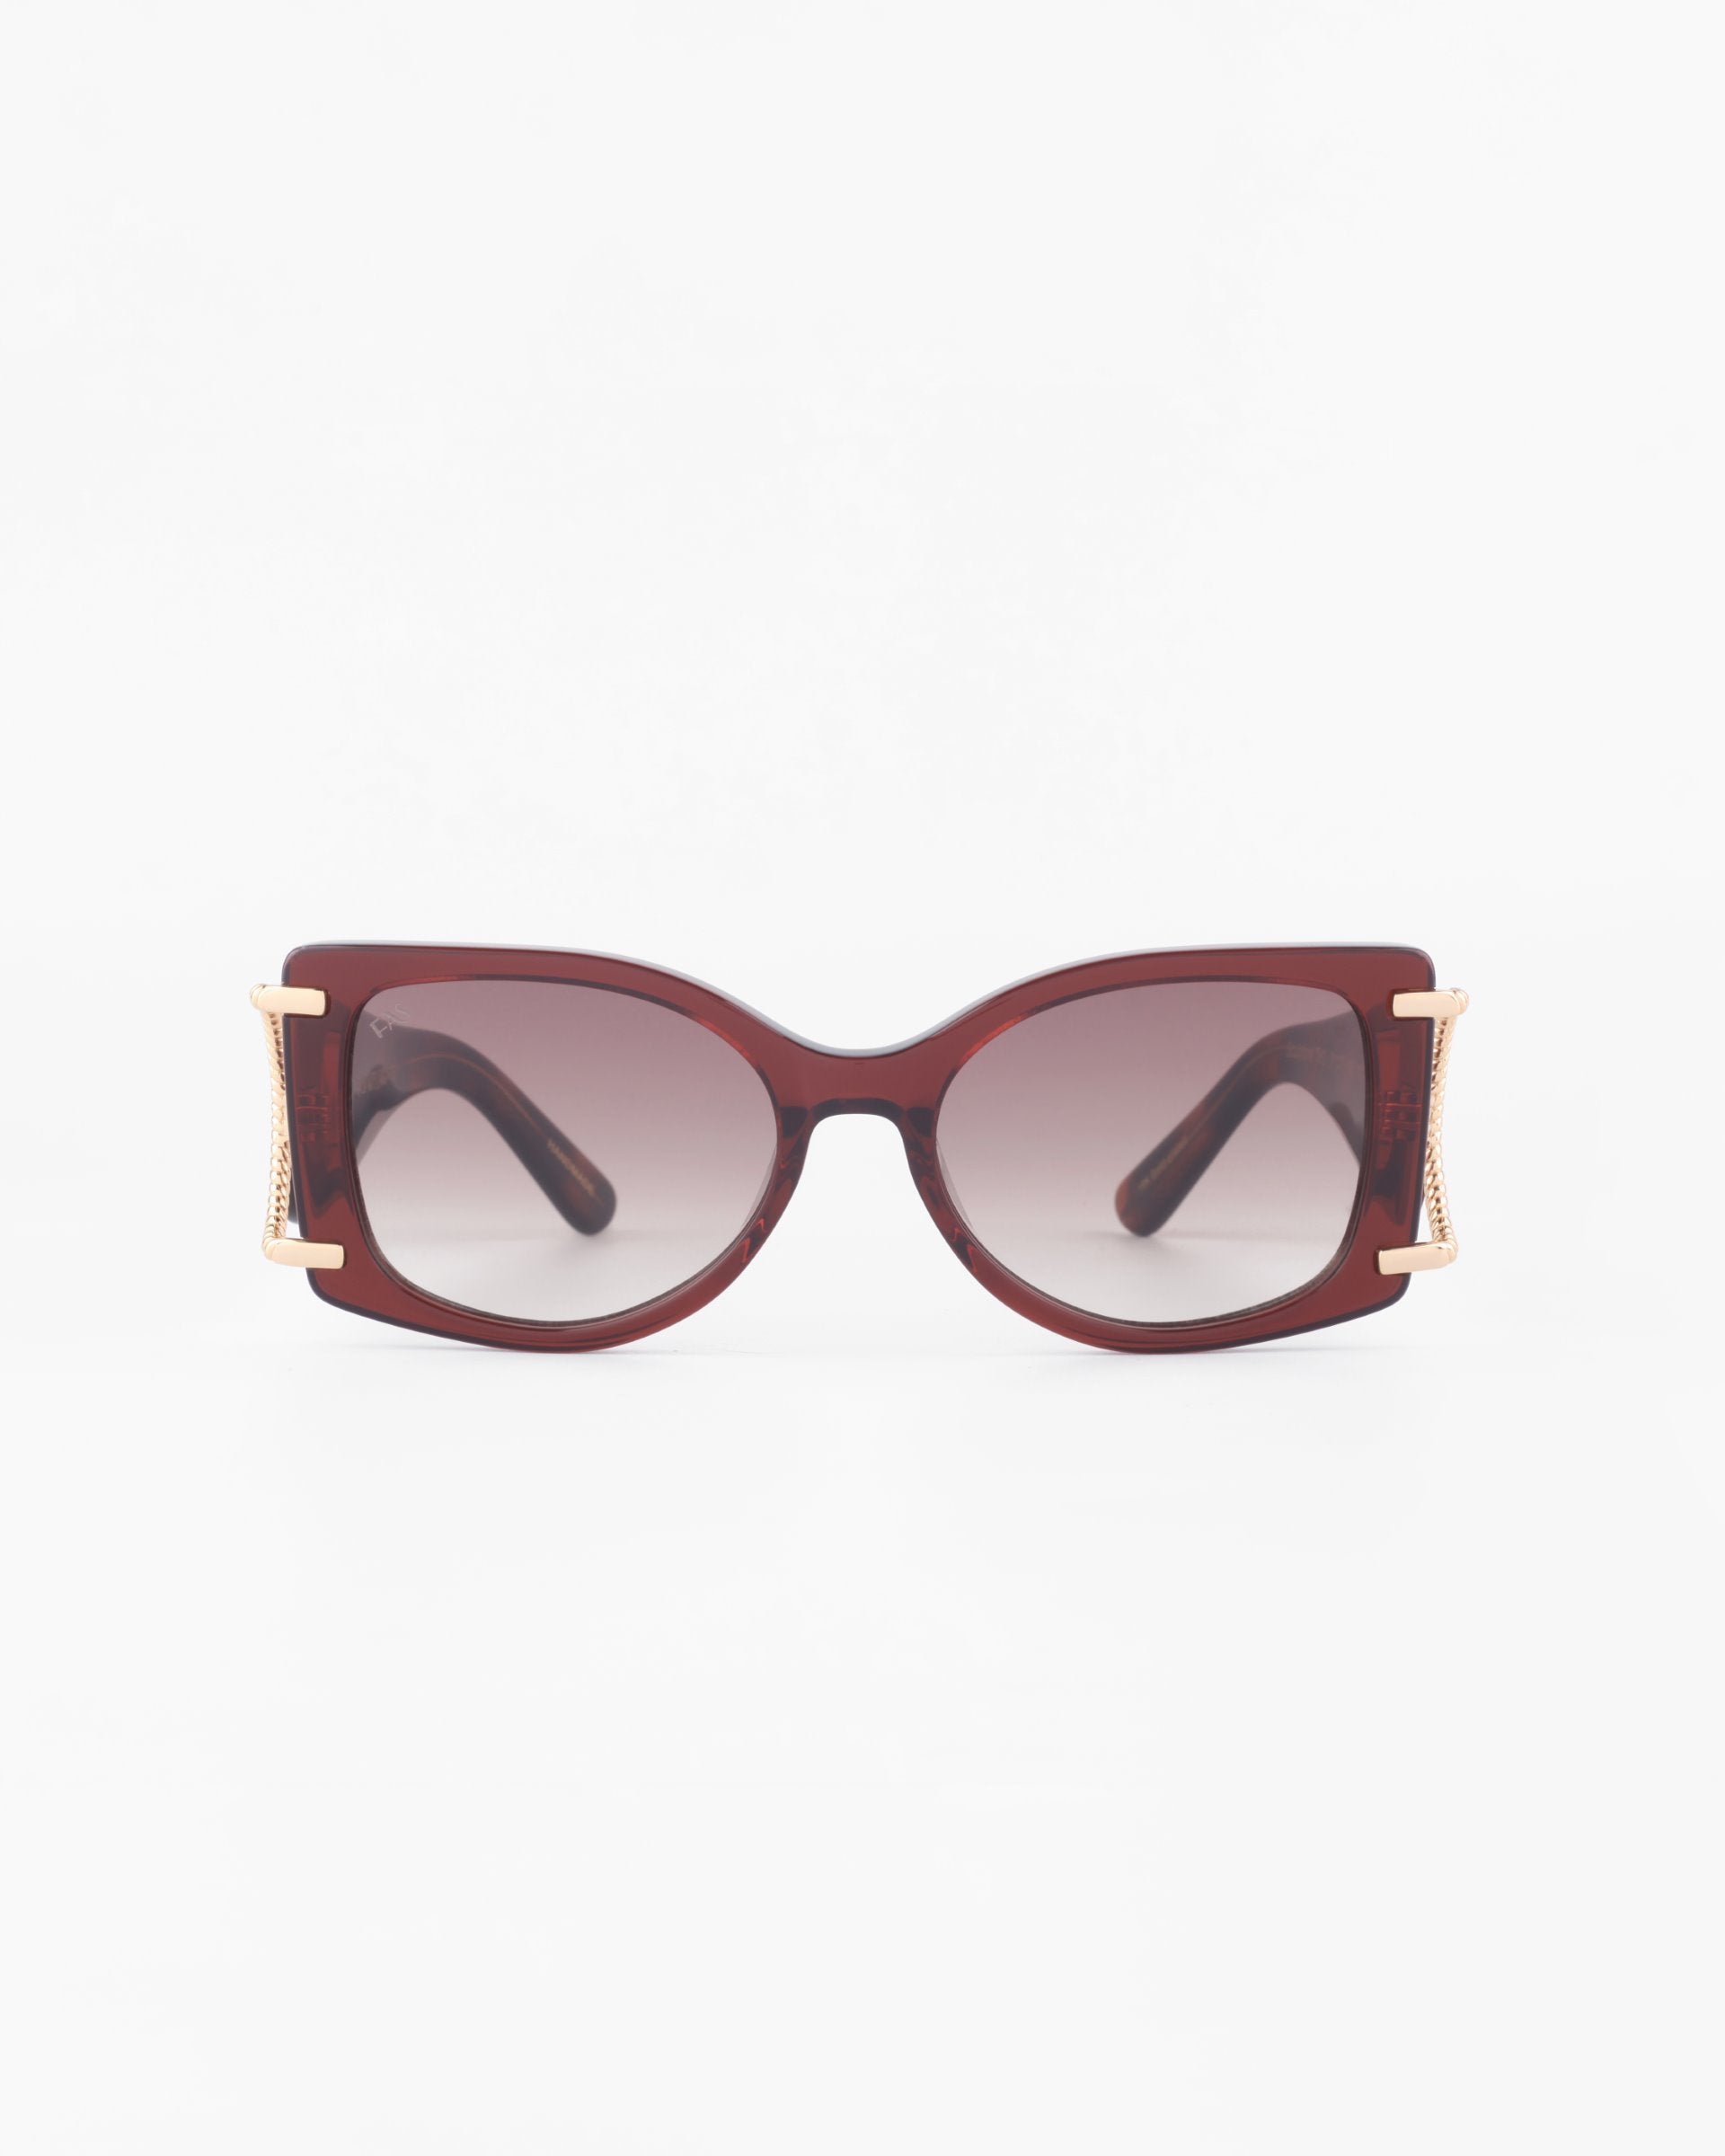 A pair of stylish, oversized acetate sunglasses with dark gradient lenses, a maroon frame, and 18-karat gold-plated accents on the temples. Boasting 100% UVA &amp; UVB protection, the Sculpture glasses by For Art&#39;s Sake® are positioned against a white background, showing a frontal view.